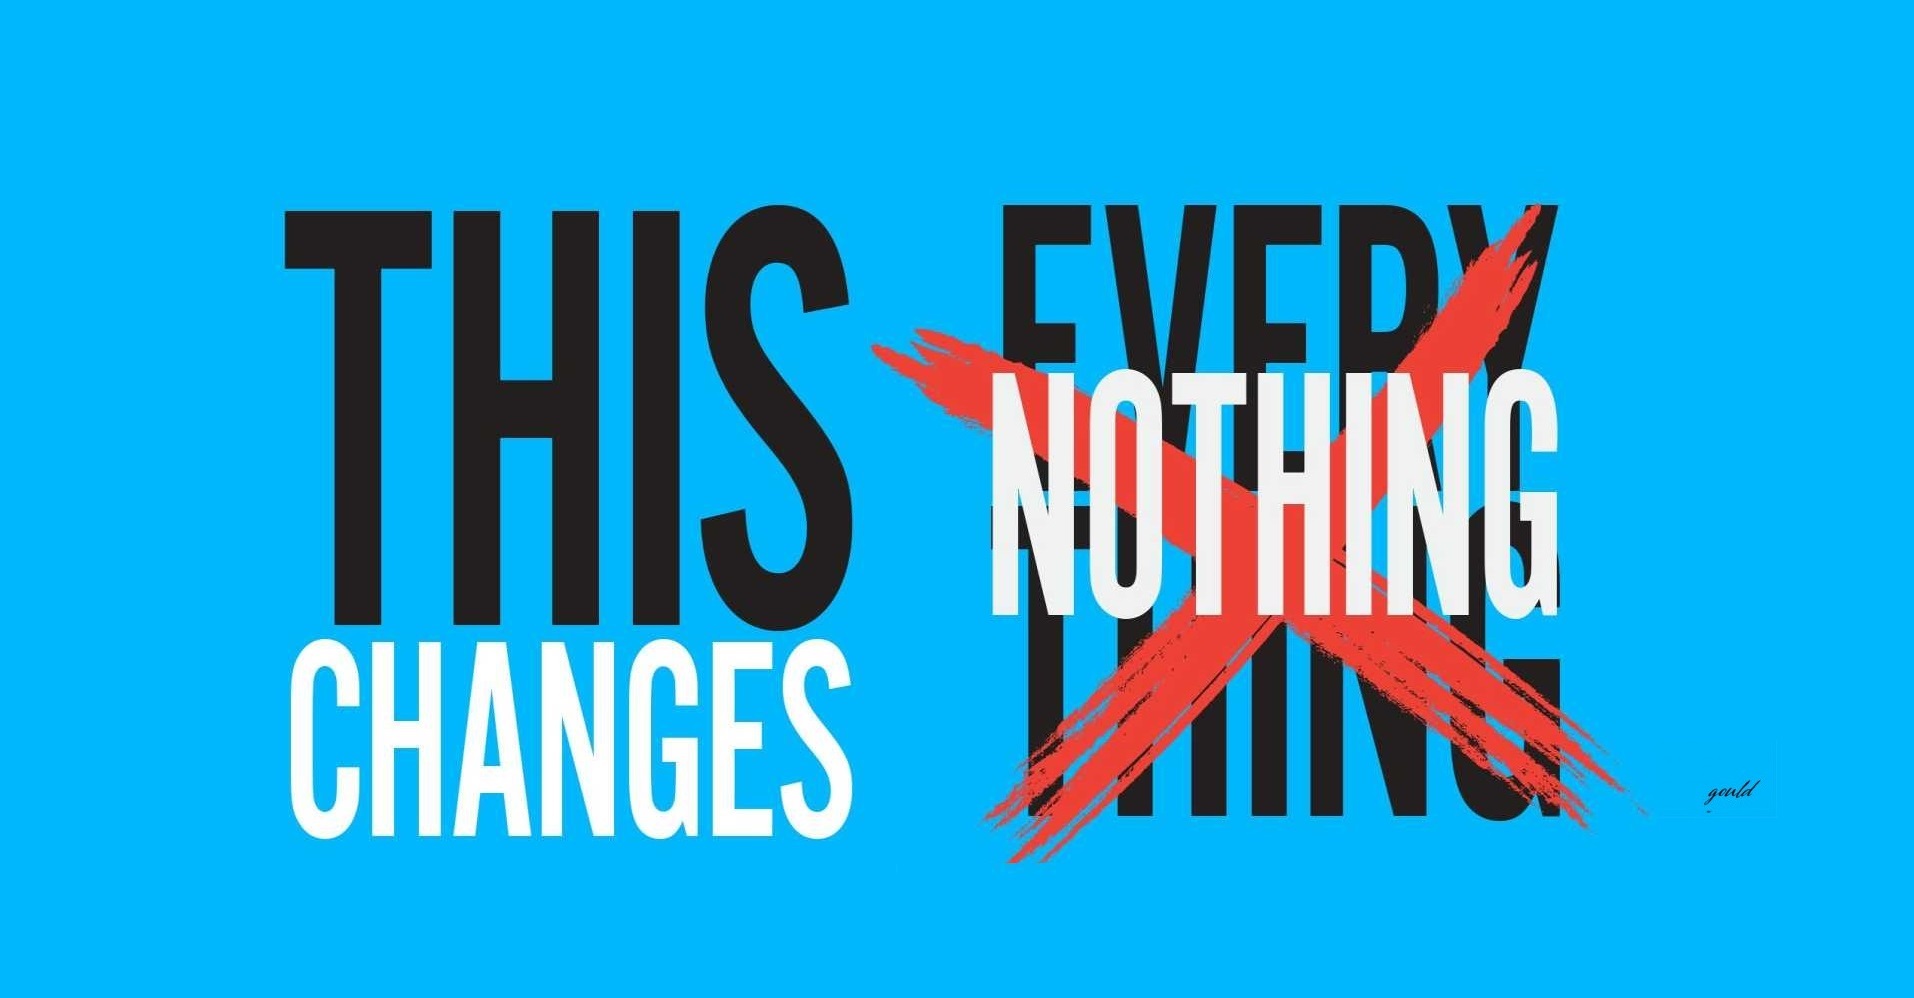 Book Review: This Changes Everything by Naomi Klein